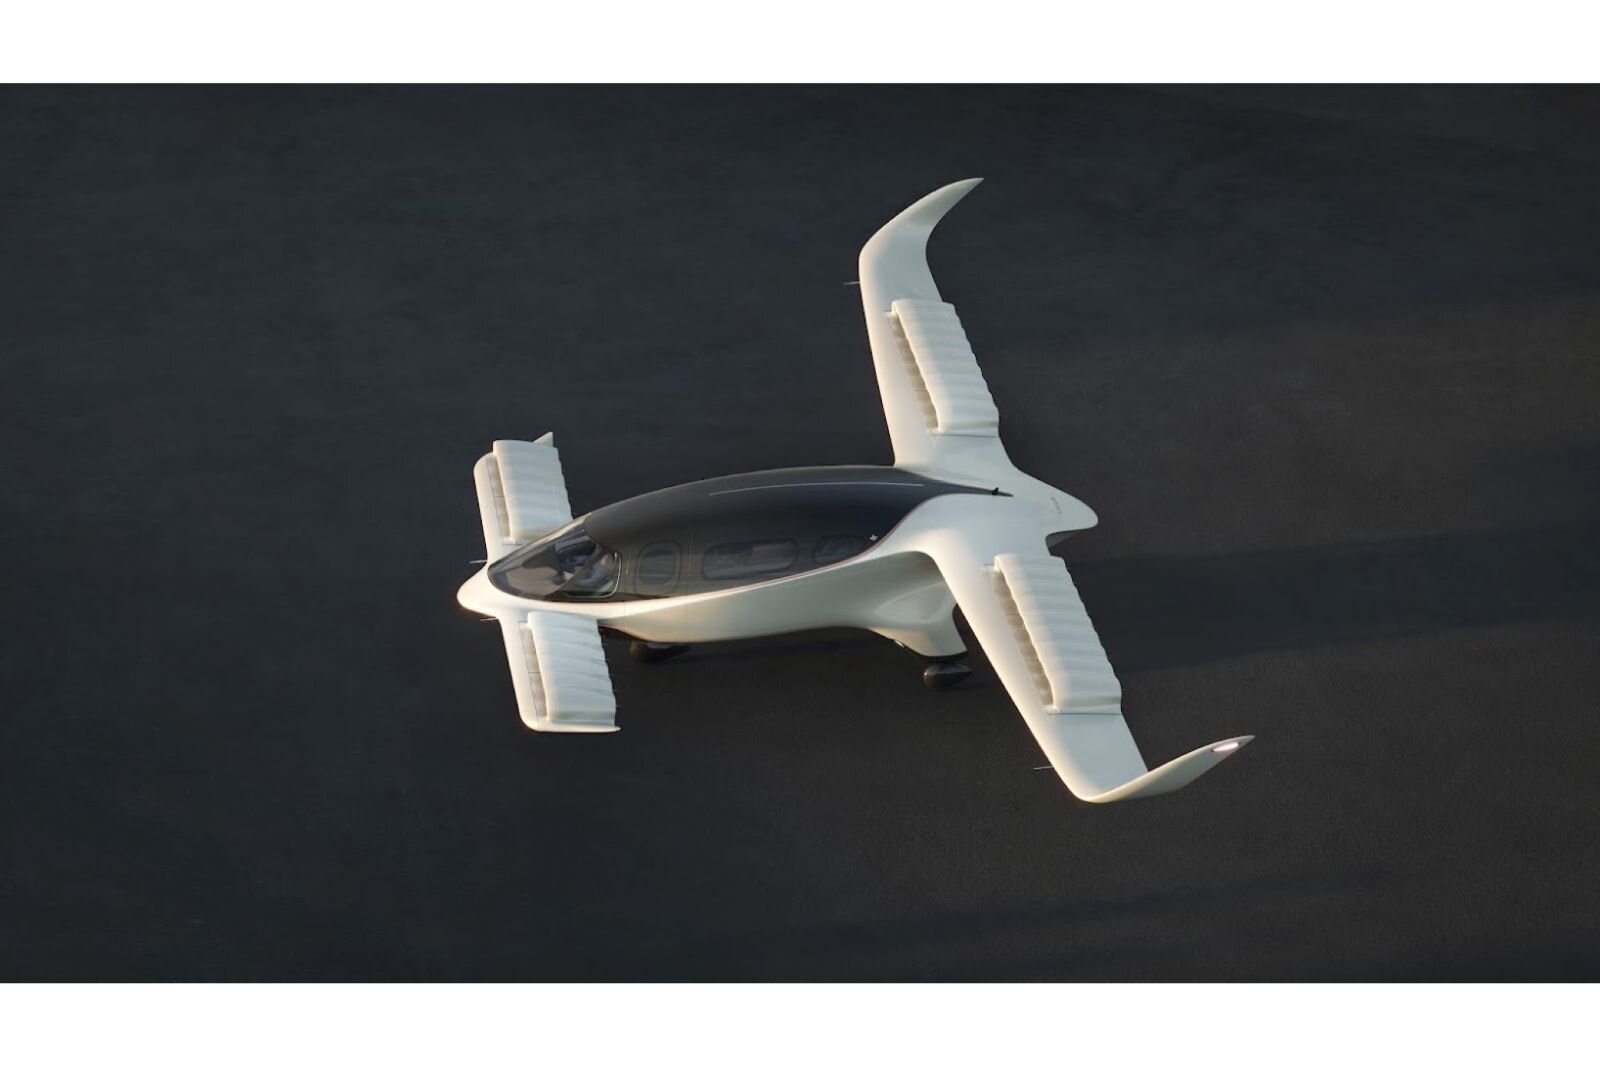 These are the types of drones that could utilize a drone park in Battle Creek.